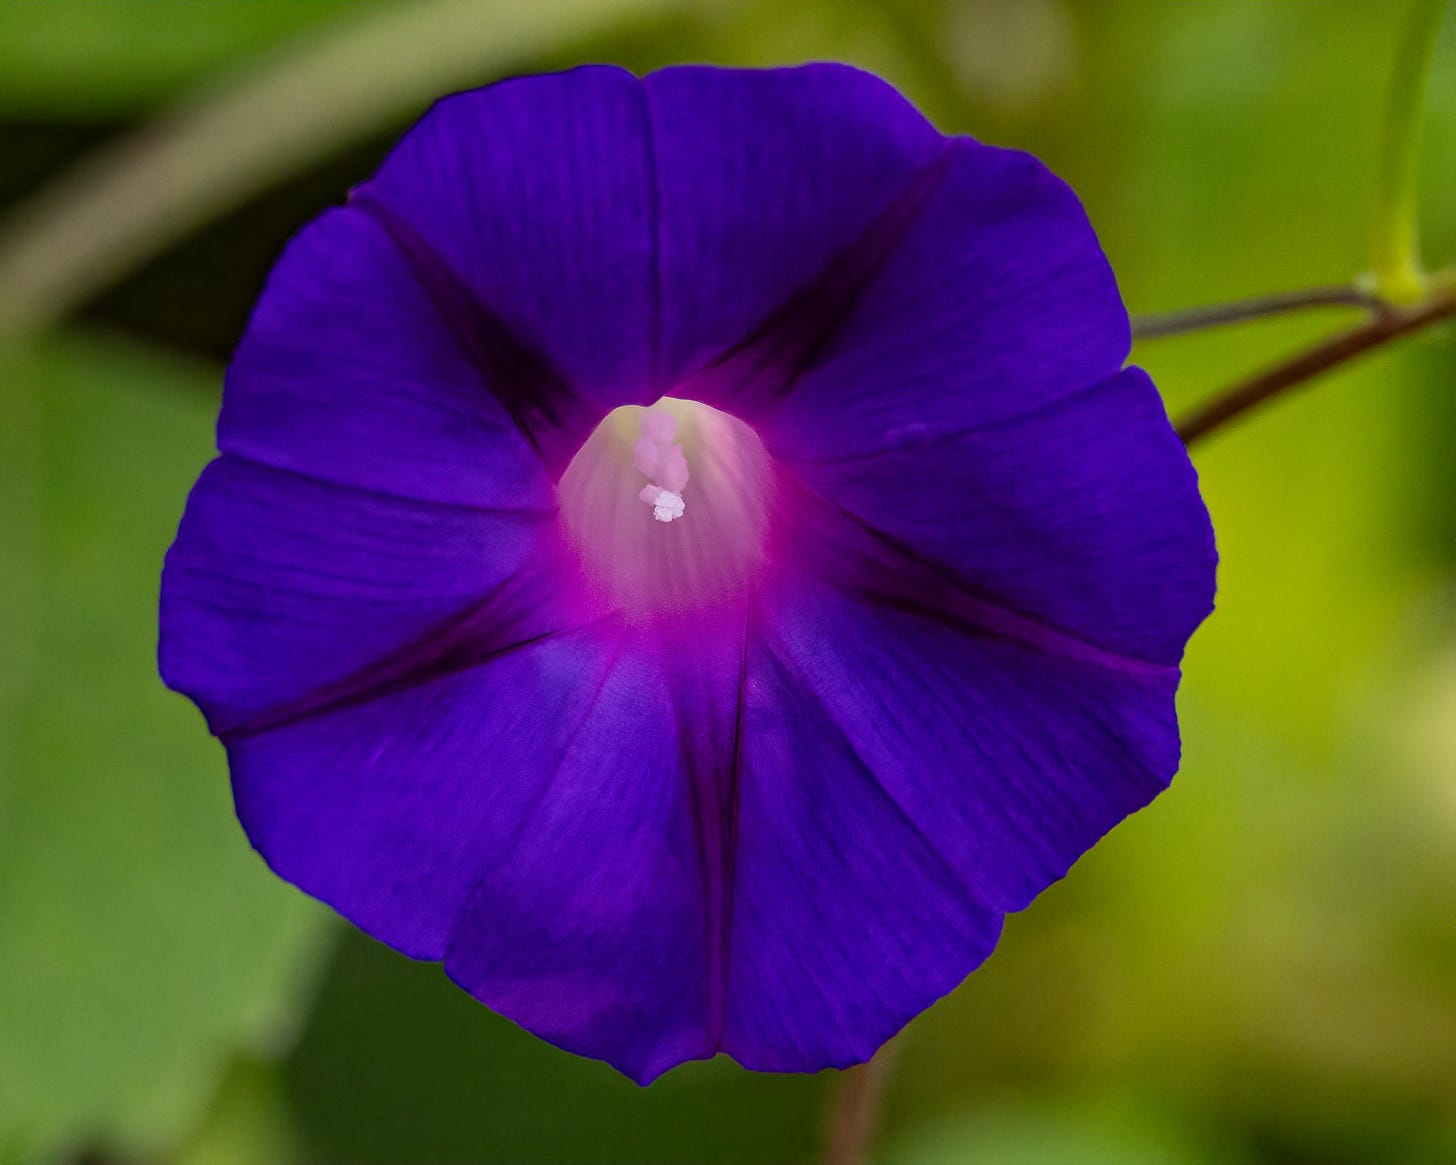 This morning glory flower is deep purple with a bright pink center.